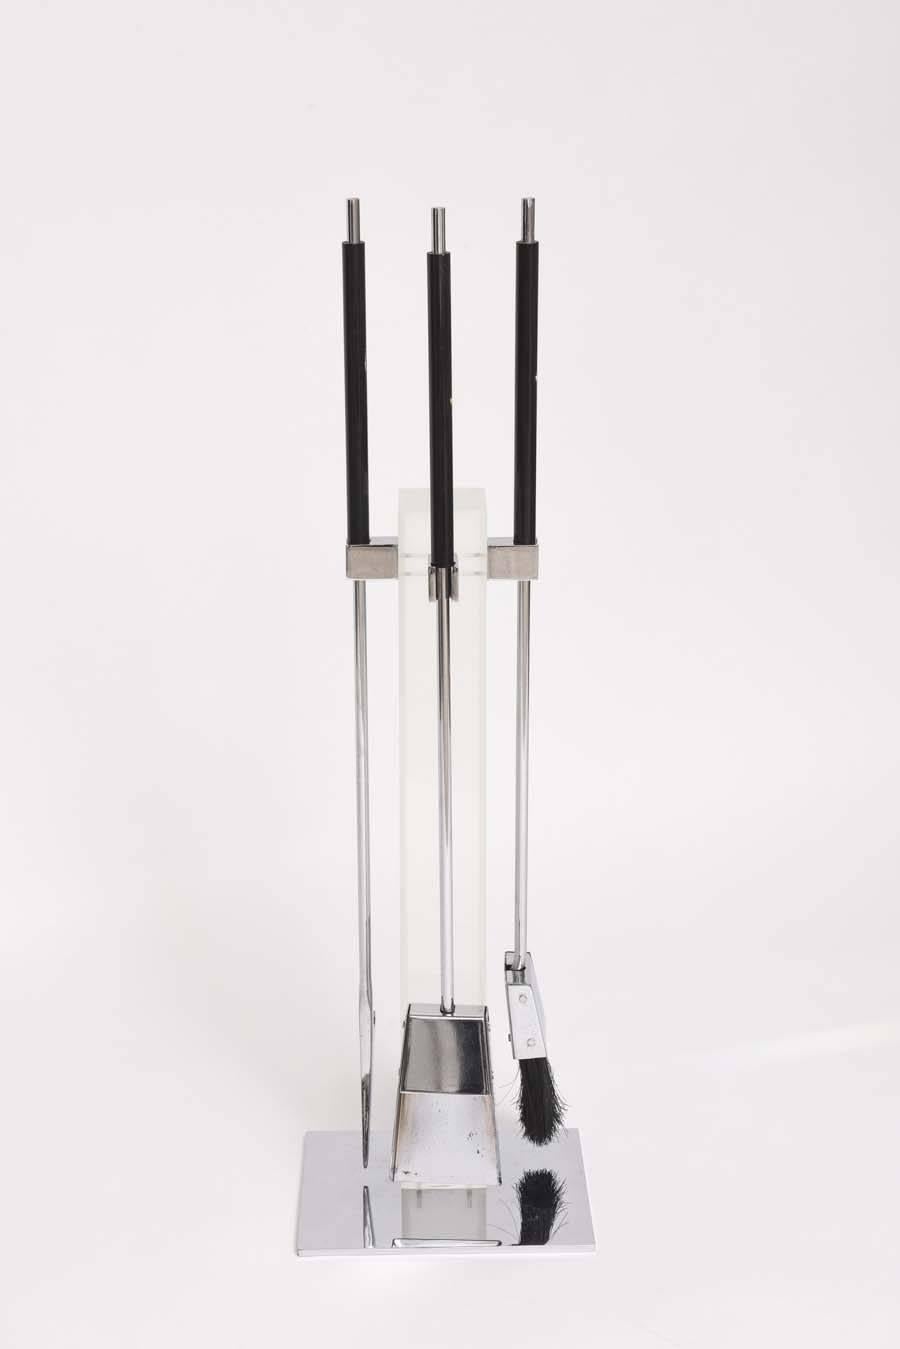 This handsome fire-tool set is in the style of pieces created by Danny Alessandro of NYC in the 1980s. The set is in polished chrome with black Lucite handles and consists of a log-poker, shovel and broom. 

For best net trade price or additional